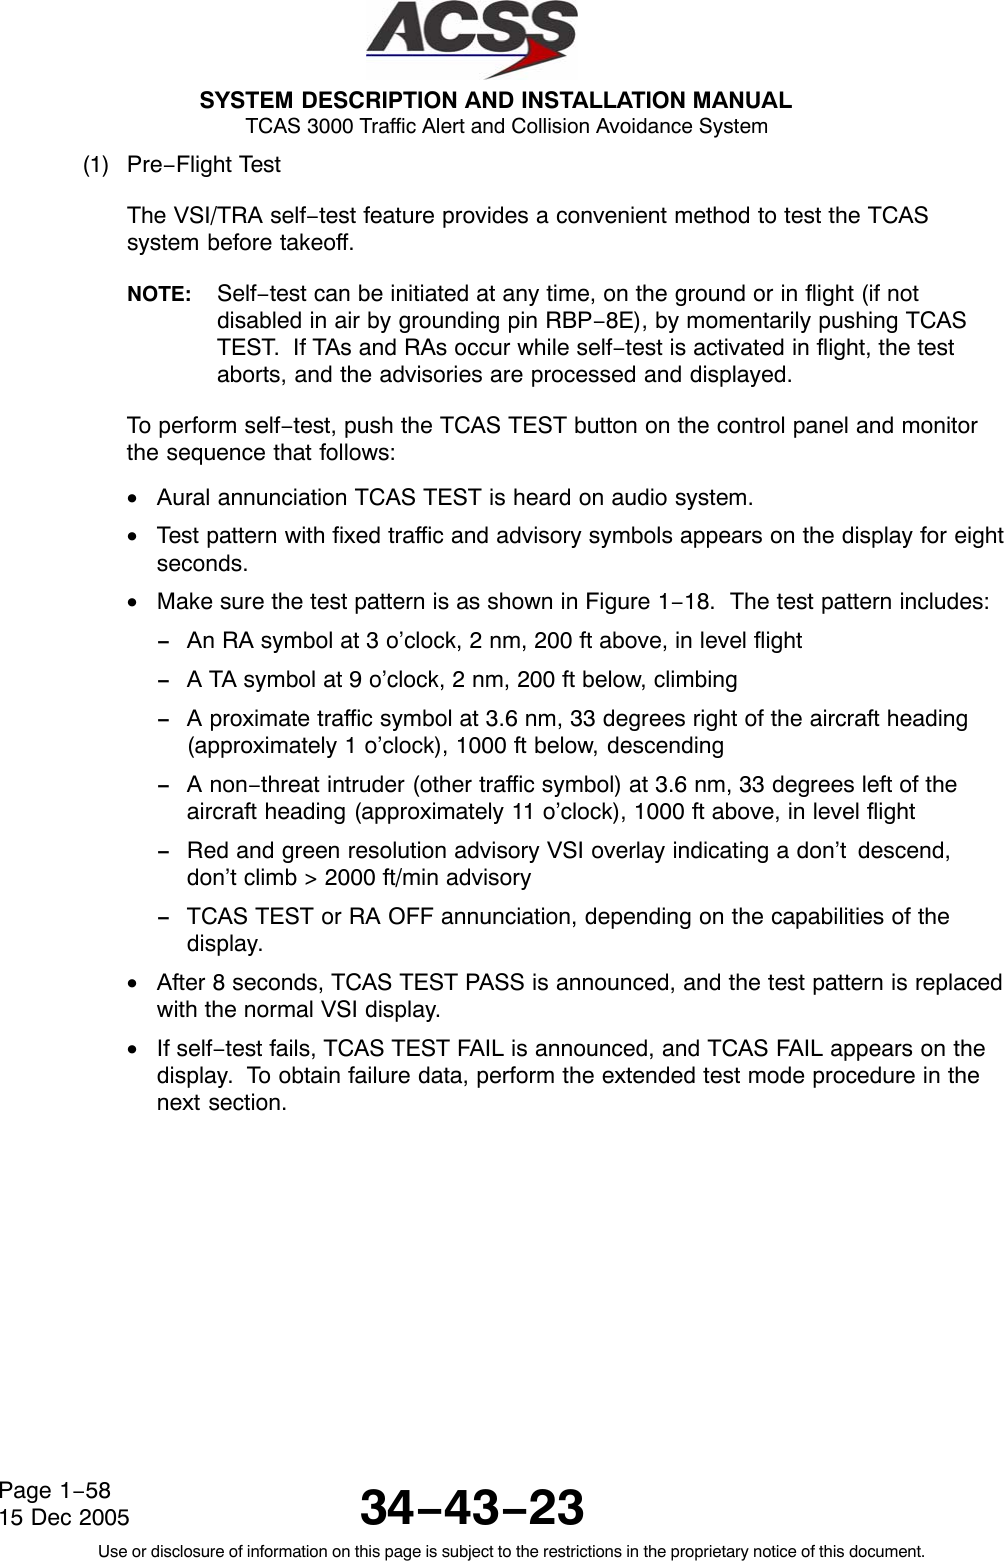  SYSTEM DESCRIPTION AND INSTALLATION MANUAL TCAS 3000 Traffic Alert and Collision Avoidance System34−43−23Use or disclosure of information on this page is subject to the restrictions in the proprietary notice of this document.Page 1−5815 Dec 2005(1) Pre−Flight TestThe VSI/TRA self−test feature provides a convenient method to test the TCASsystem before takeoff.NOTE: Self−test can be initiated at any time, on the ground or in flight (if notdisabled in air by grounding pin RBP−8E), by momentarily pushing TCASTEST.  If TAs and RAs occur while self−test is activated in flight, the testaborts, and the advisories are processed and displayed.To perform self−test, push the TCAS TEST button on the control panel and monitorthe sequence that follows:•Aural annunciation TCAS TEST is heard on audio system.•Test pattern with fixed traffic and advisory symbols appears on the display for eightseconds.•Make sure the test pattern is as shown in Figure 1−18.  The test pattern includes:−An RA symbol at 3 o’clock, 2 nm, 200 ft above, in level flight−A TA symbol at 9 o’clock, 2 nm, 200 ft below, climbing−A proximate traffic symbol at 3.6 nm, 33 degrees right of the aircraft heading(approximately 1 o’clock), 1000 ft below, descending−A non−threat intruder (other traffic symbol) at 3.6 nm, 33 degrees left of theaircraft heading (approximately 11 o’clock), 1000 ft above, in level flight−Red and green resolution advisory VSI overlay indicating a don’t descend,don’t climb &gt; 2000 ft/min advisory−TCAS TEST or RA OFF annunciation, depending on the capabilities of thedisplay.•After 8 seconds, TCAS TEST PASS is announced, and the test pattern is replacedwith the normal VSI display.•If self−test fails, TCAS TEST FAIL is announced, and TCAS FAIL appears on thedisplay.  To obtain failure data, perform the extended test mode procedure in thenext section.